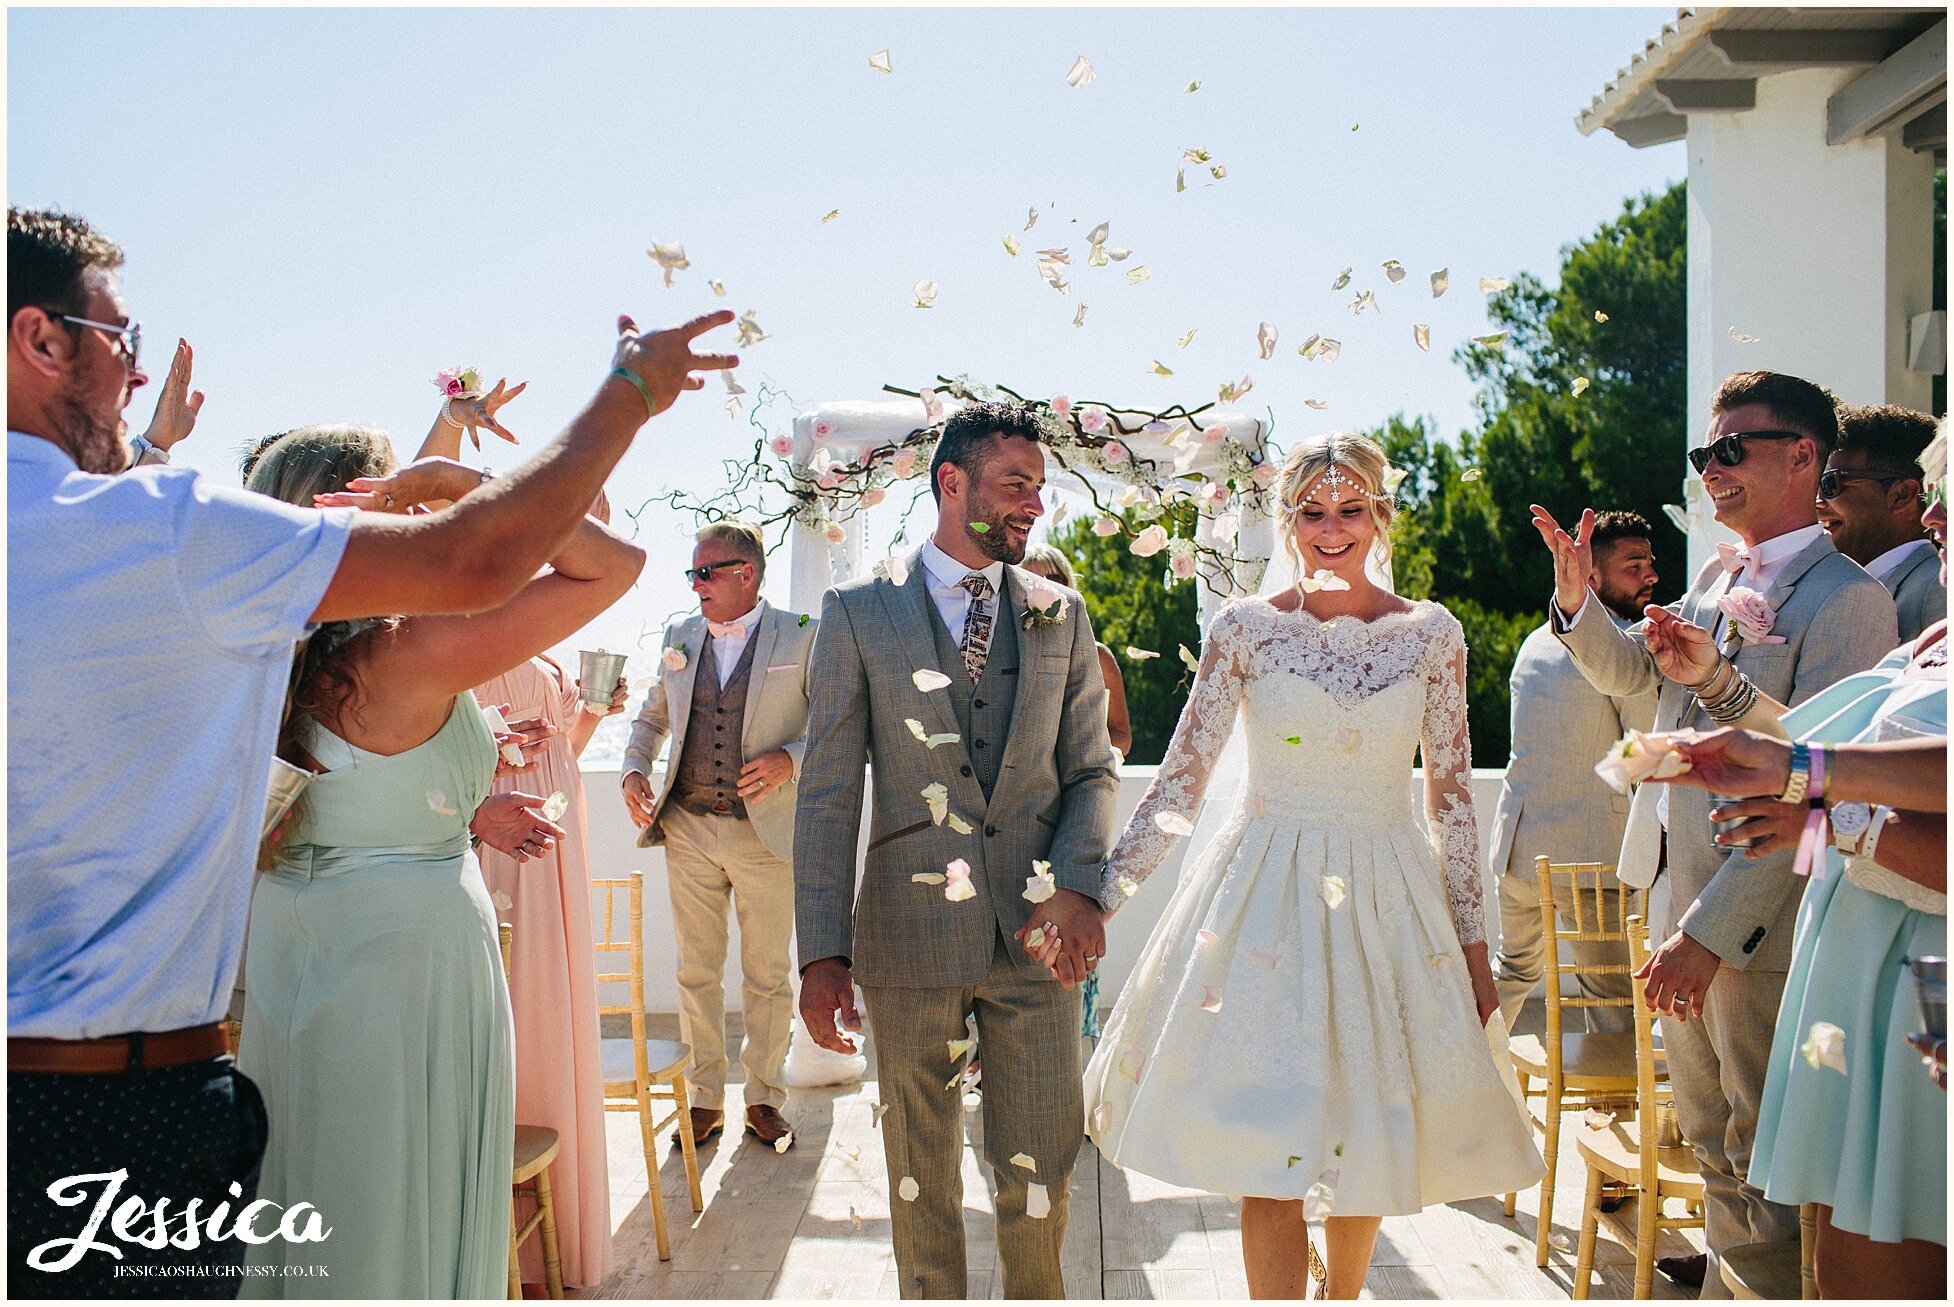 newly wed's exit their ceremony as guests throw confetti - wedding photography at Elixir, Ibiza